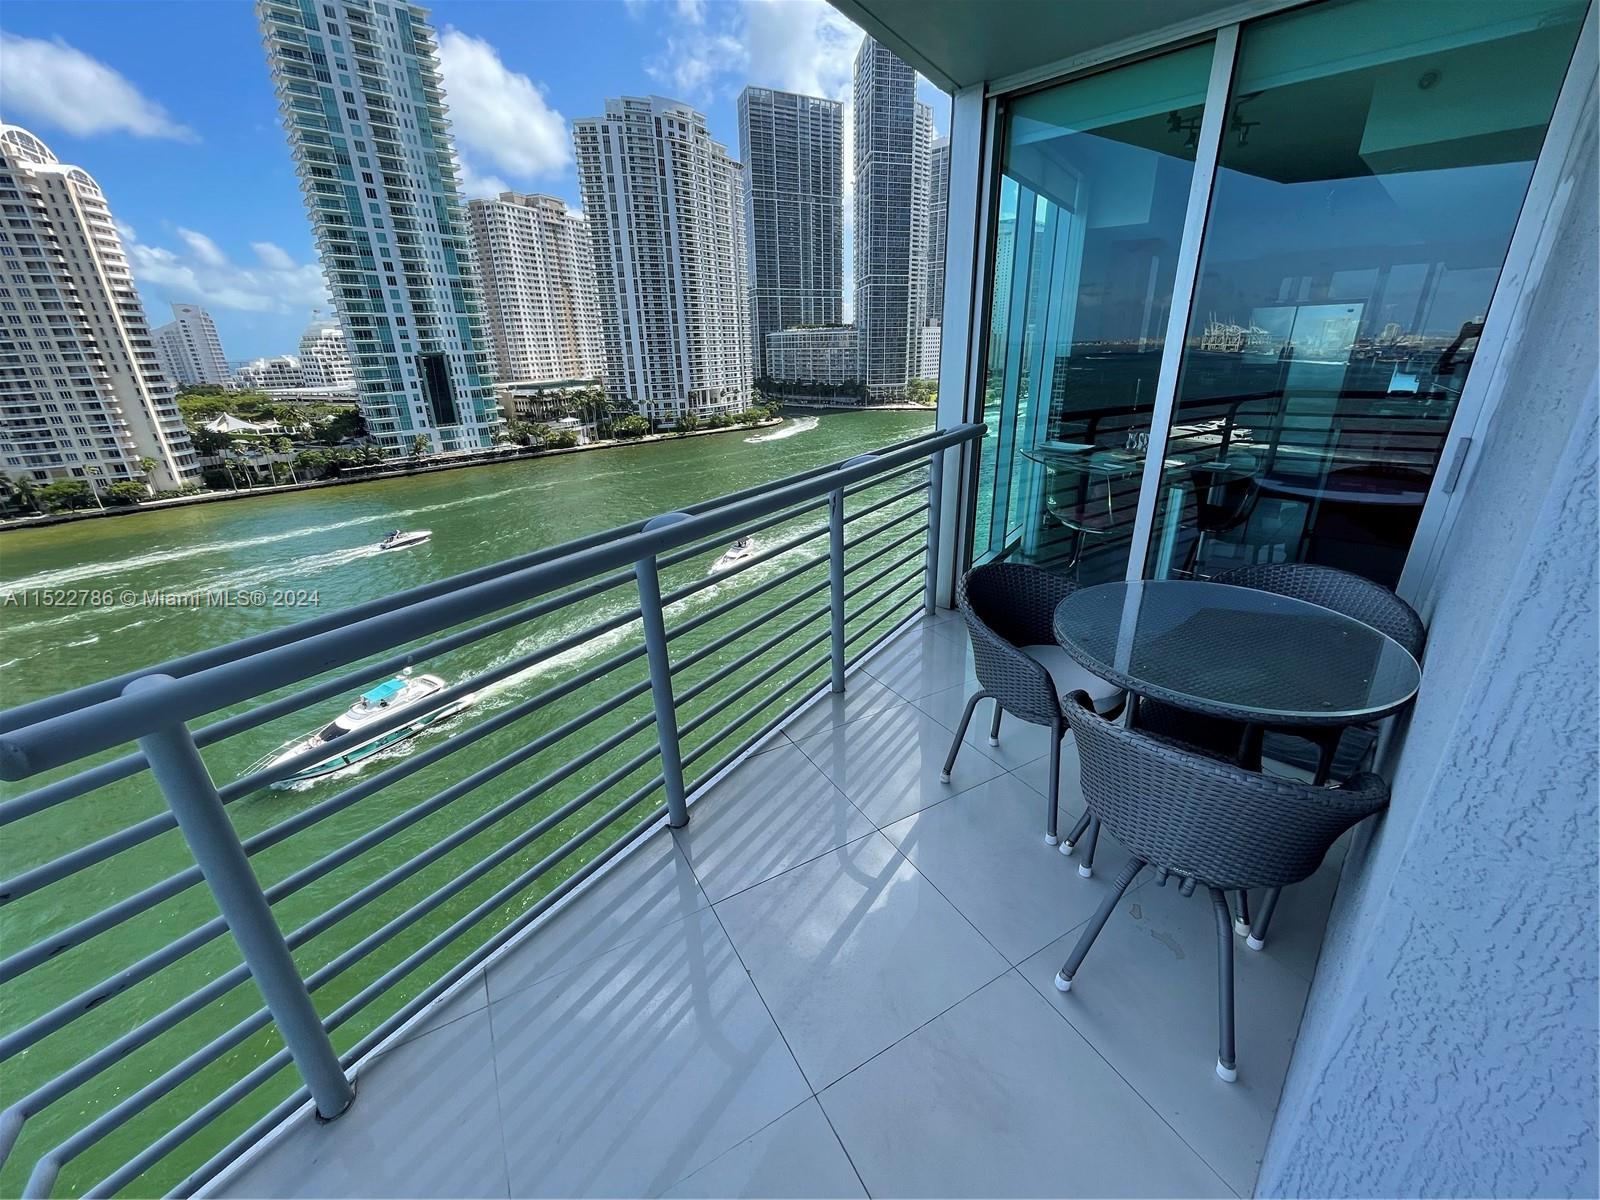 CORNER UNIT WITH UNOBTRUCTED WATER VIEWS, RARELY AVAILABLE AT ONE MIAMI 09 LINE. 3 BEDROOMS, 2 BATHROOMS, 1,792 sq.ft.under AC+ 270sq.ft. Balcony =total 2,062sq.ft.
 THE UNIT HAS BEEN RENOVATED. HAS LOTS OF LIGTH AND OPEN SPACE. GREAT LOCATION, WALKING DISTANCE TO MOVIE THEATER, SHOPPING, PHARMACY, GYMS, SUPERMARKET. MINUTES DRIVE TO AIRPORT, MIAMI BEACH, MIDTOWN, DESIGN DISTRICT. EASY ACCESS TO I-95
UNIT OFFERED IN "AS IS" CONDITIONS, UNFURNISHED.
POOL DECK, UNDER RENOVATION/REPAIRS. SPECIAL ASSESMENT TO COVER POOL REPAIRS , PAID IN FULL. ELEVATORS UNDER MODERNIZATION,SECURITY SYSTEM BY BIOMETRIC.